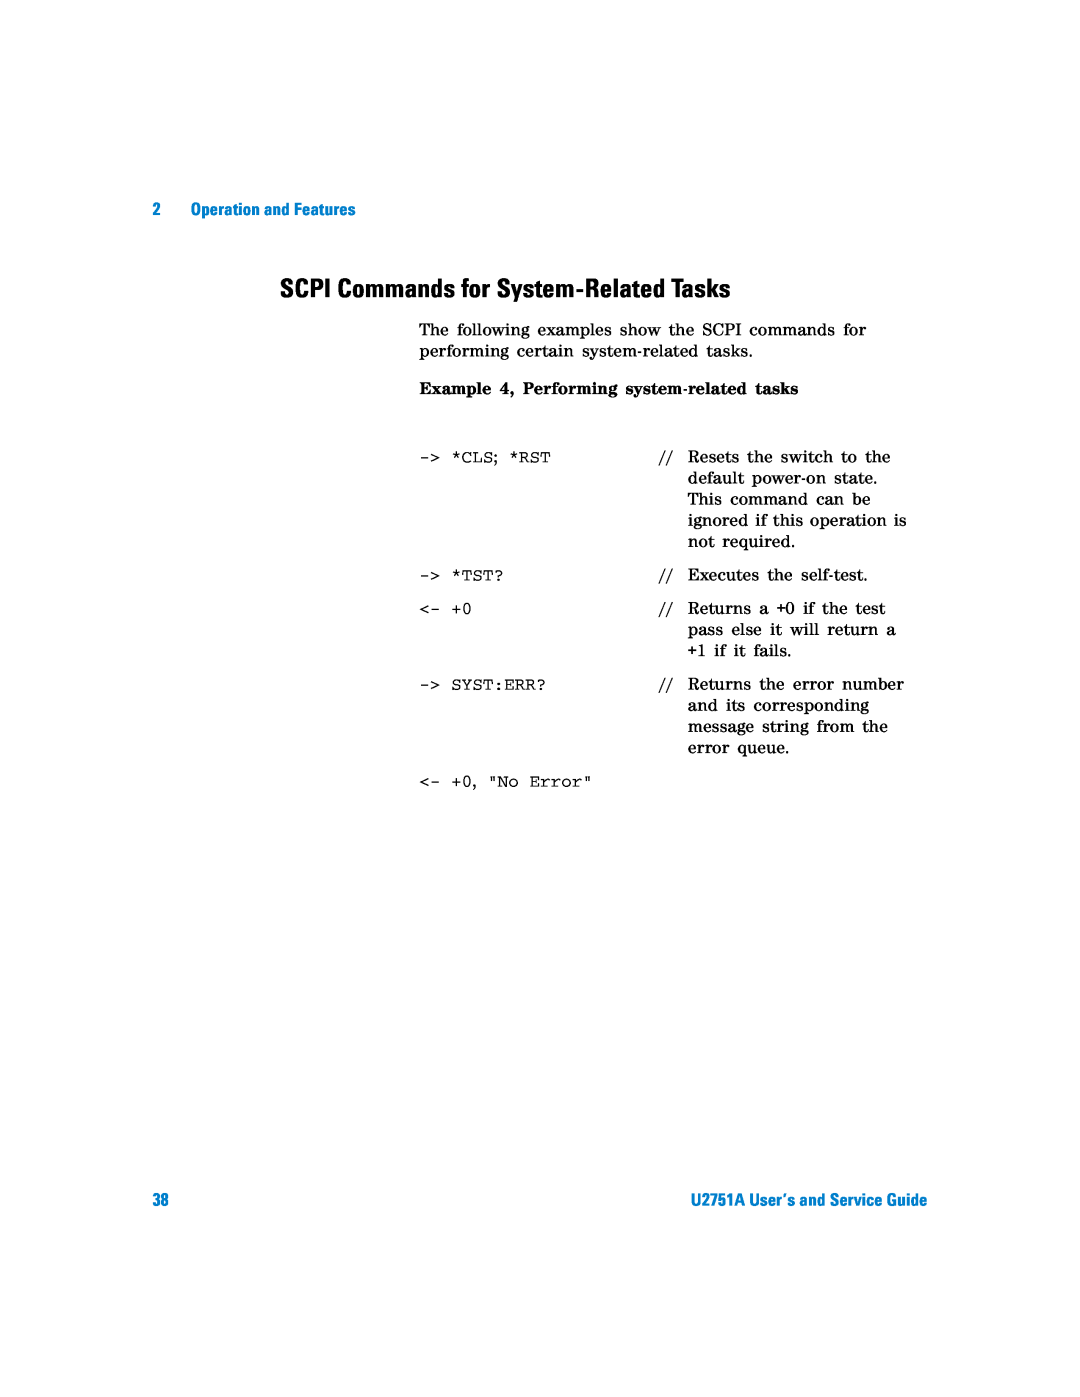 Agilent Technologies U2751A manual SCPI Commands for System-Related Tasks, Example 4, Performing system-related tasks 